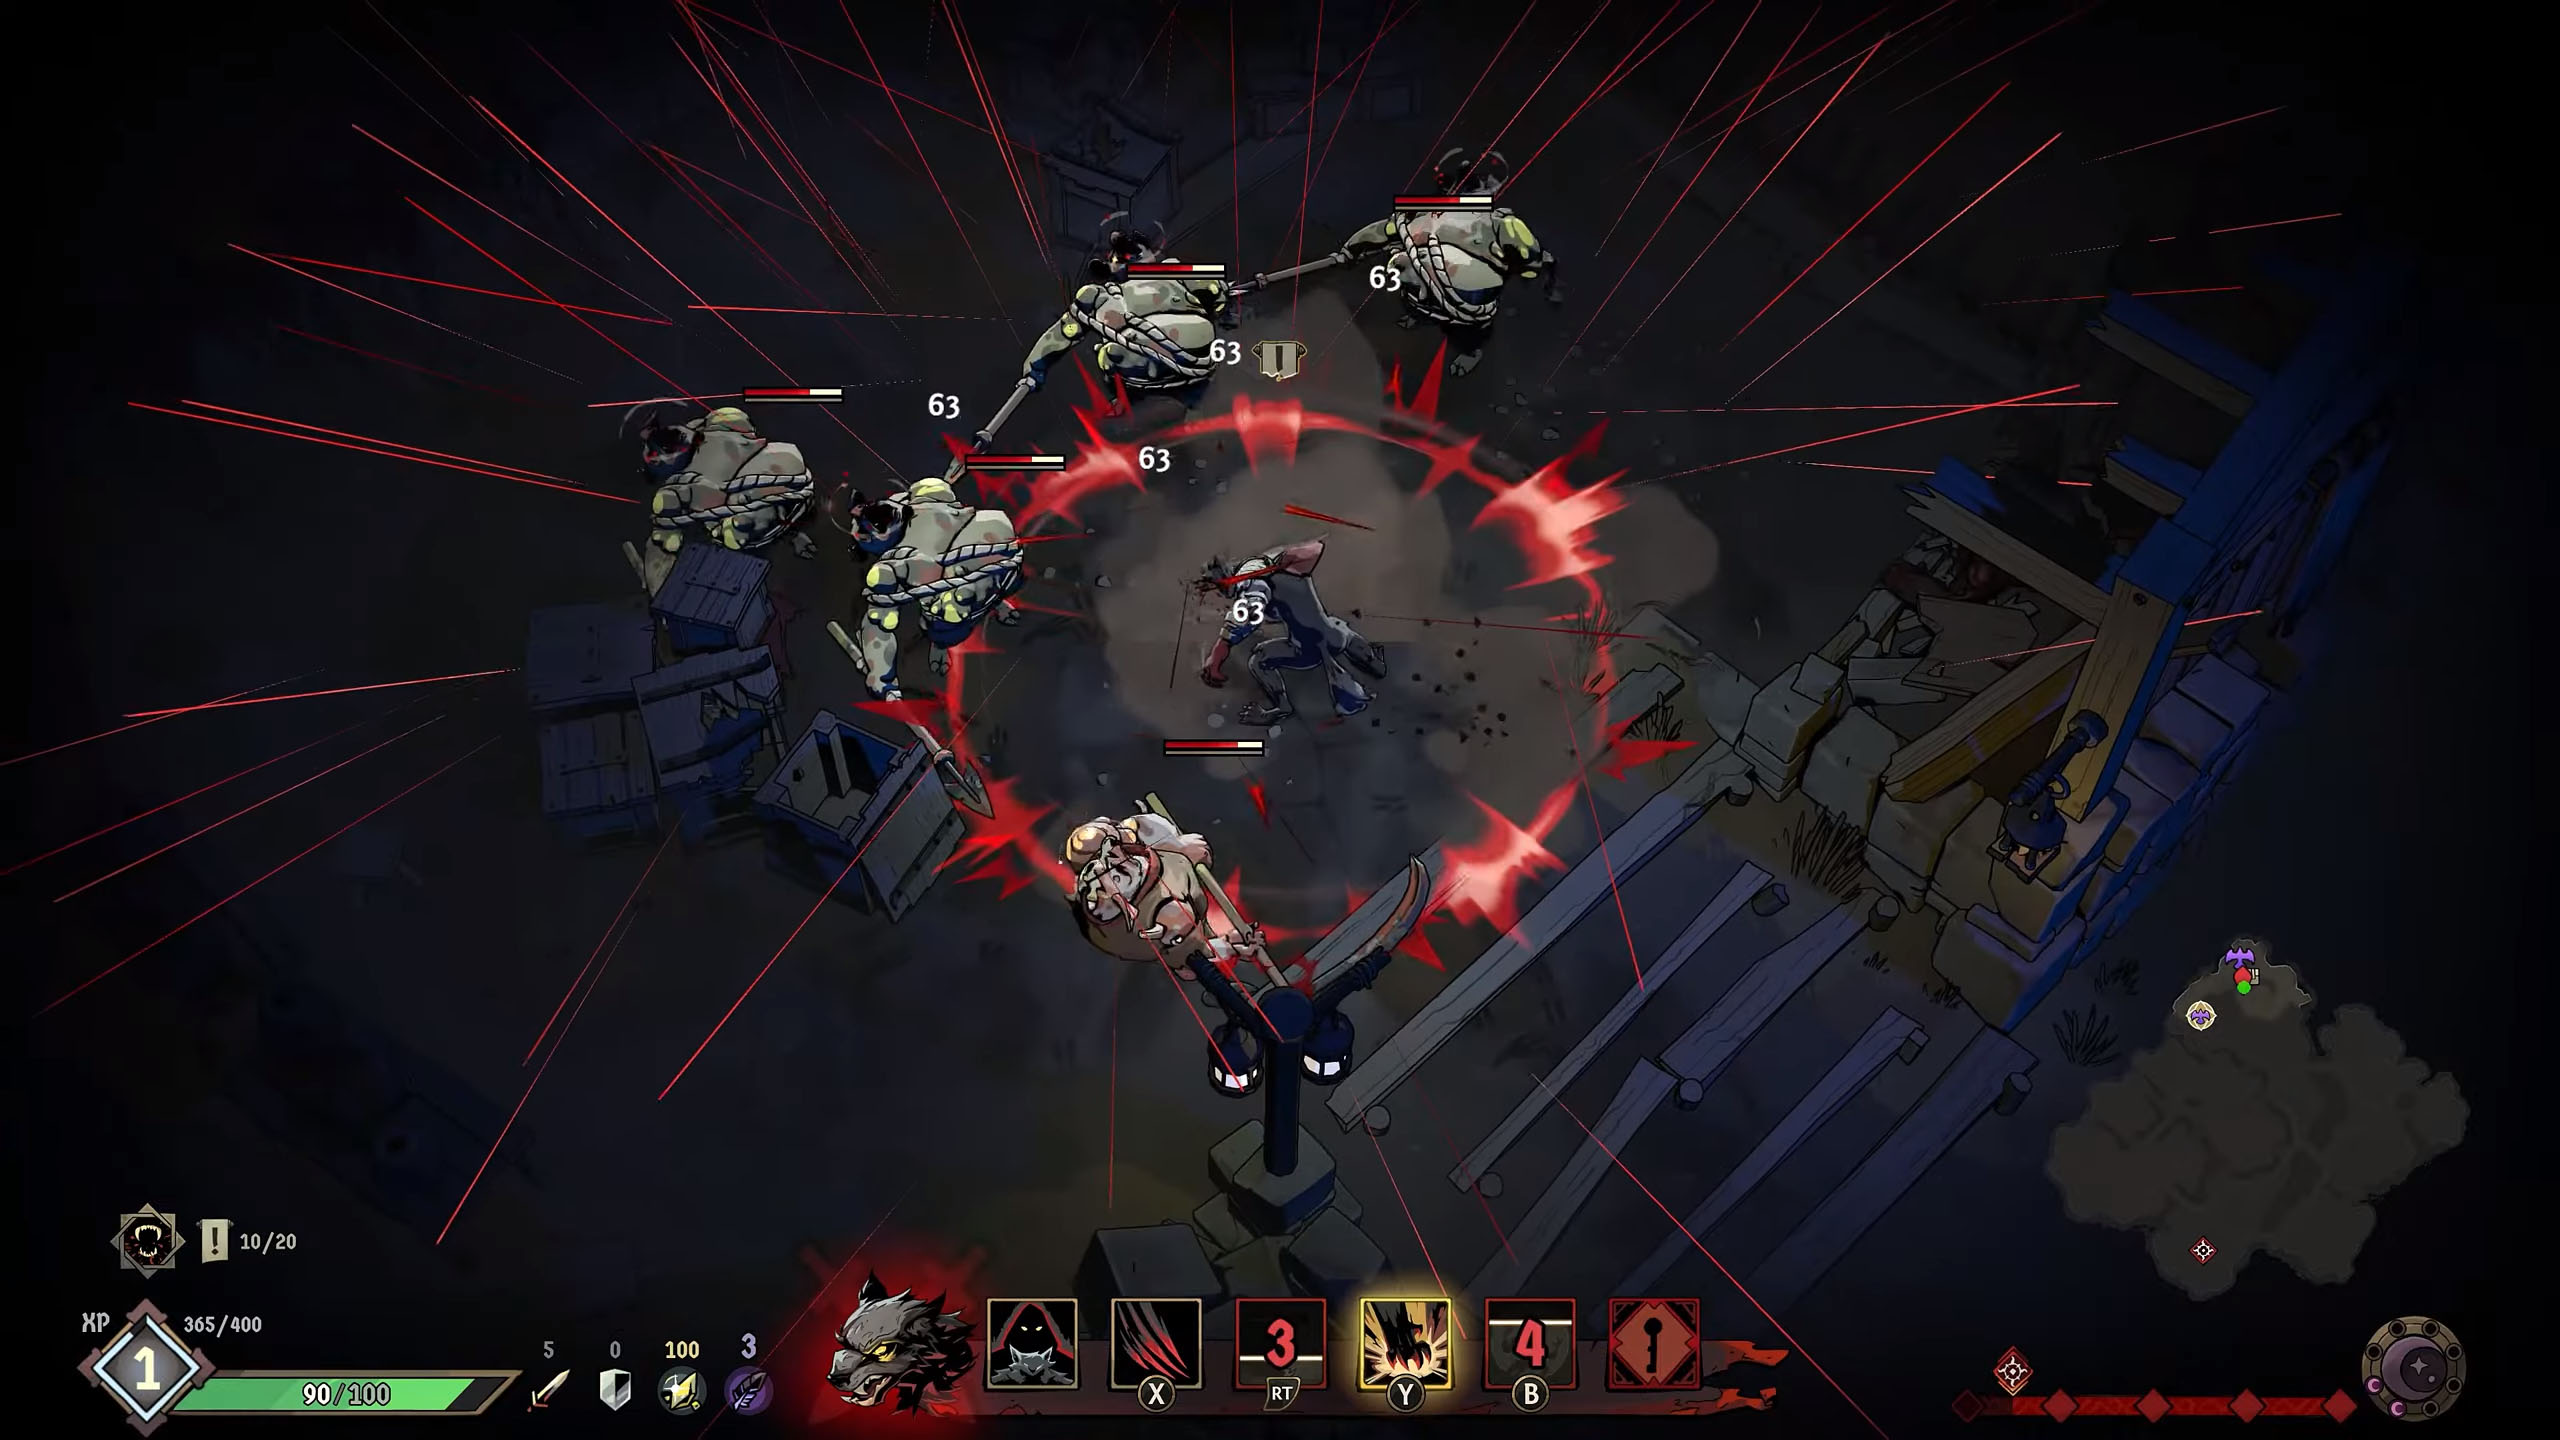 Ravenswatch gets new gameplay showing off its intense real-time combat